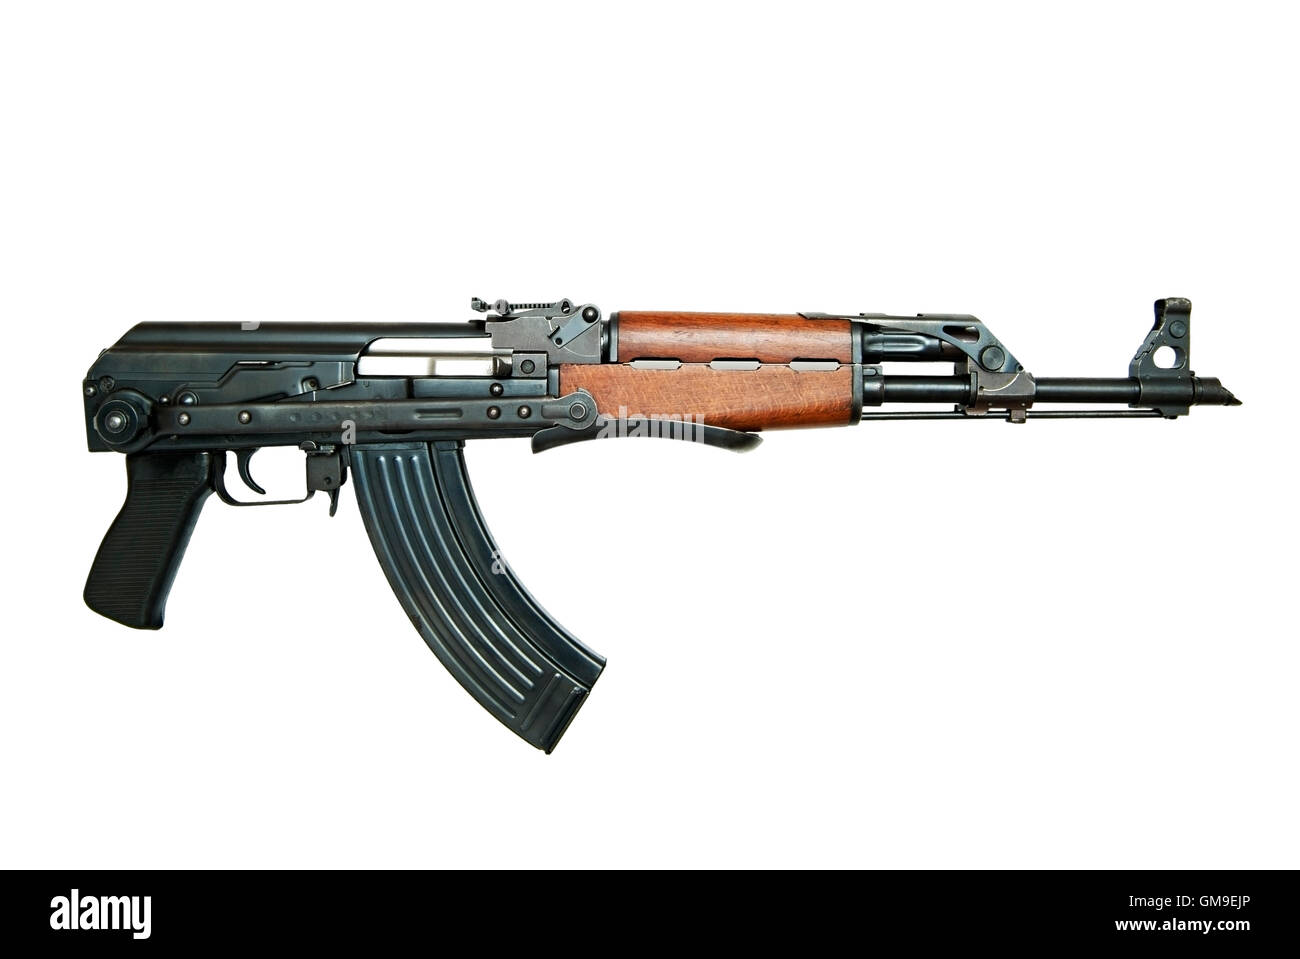 Detail Picture Of An Ak47 Nomer 18